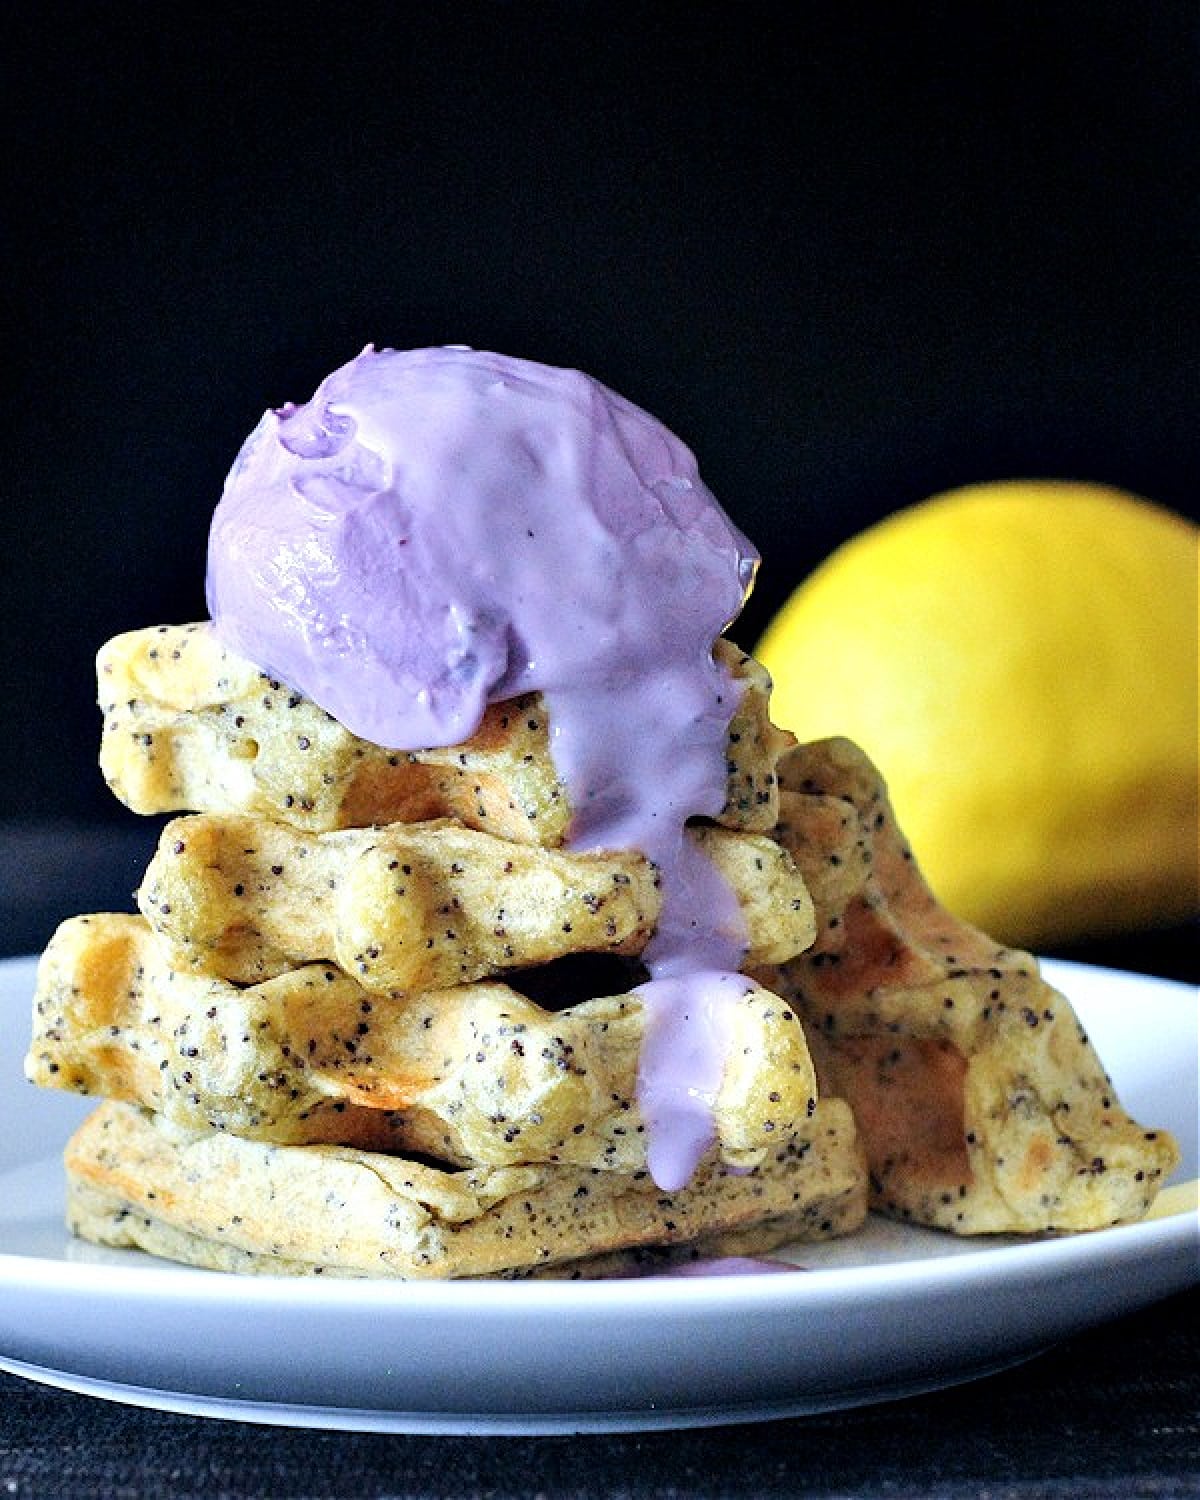 Side view of a stack of four golden yellow lemon poppyseed waffles on a white plate topped with a scoop of light purple blueberry yogurt. A whole lemon sits against a black background.